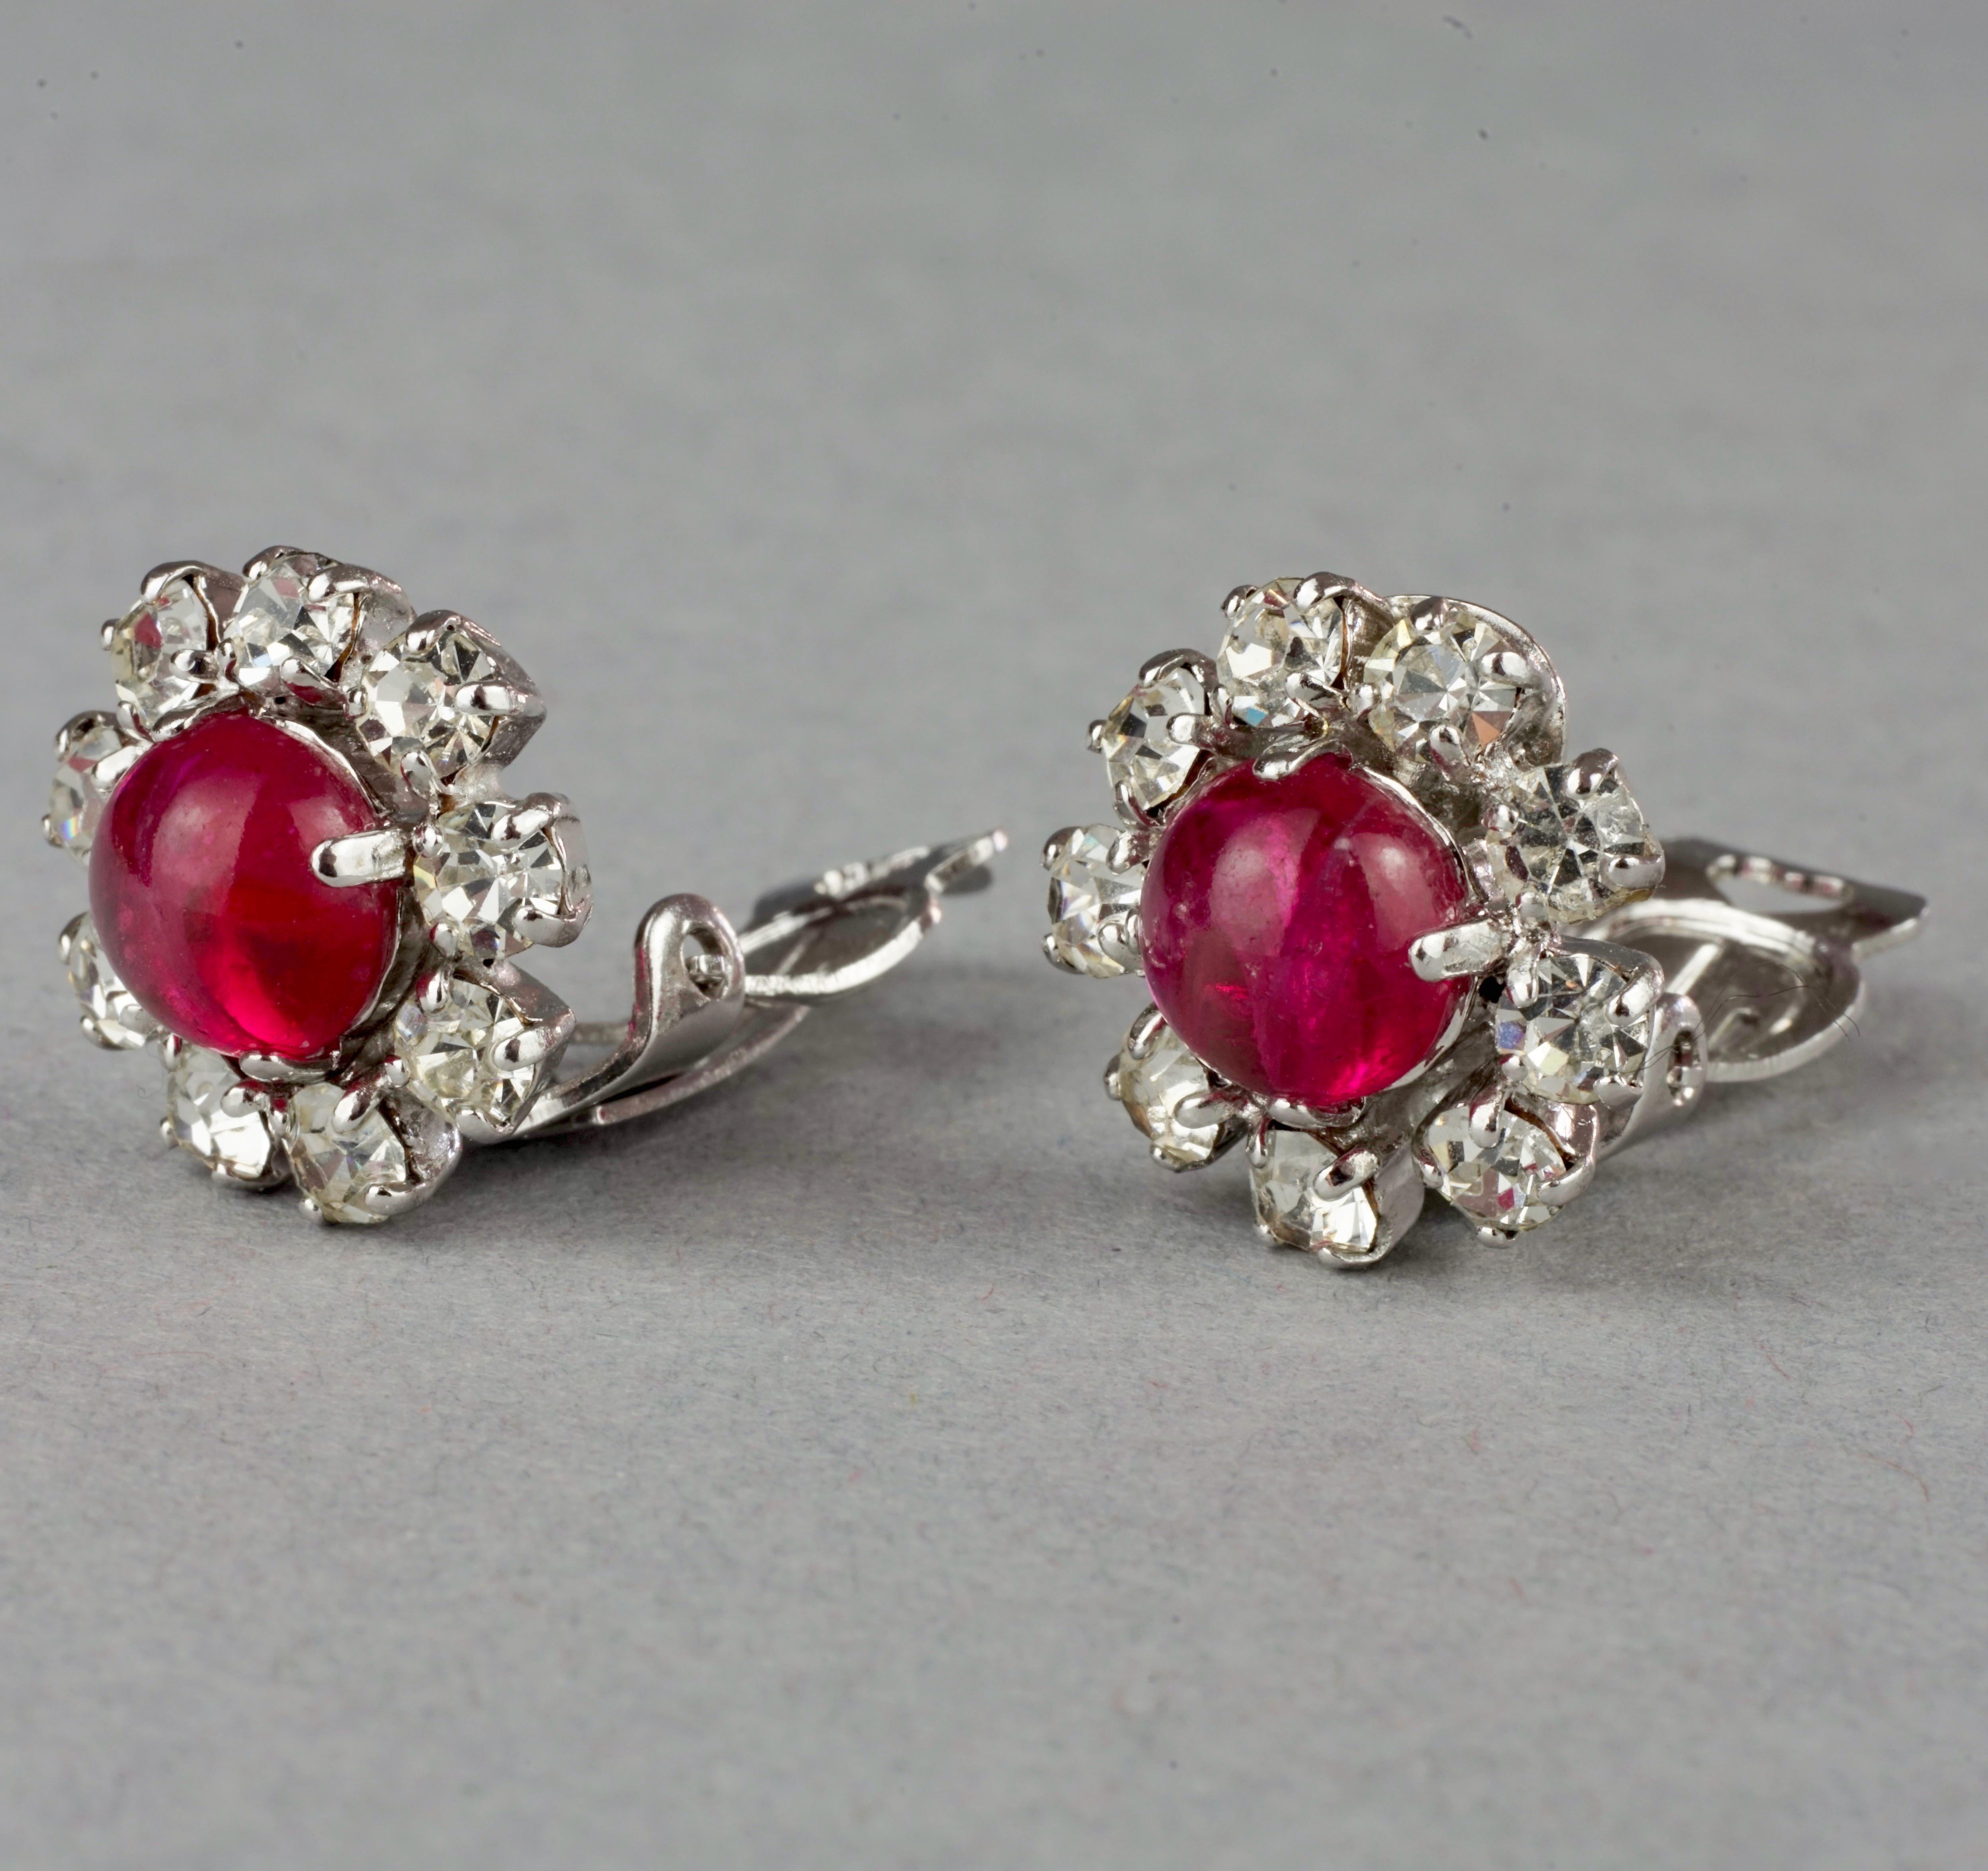 Vintage 1973 CHRISTIAN DIOR Red Glass Cabochon Rhinestone Earrings In Excellent Condition For Sale In Kingersheim, Alsace